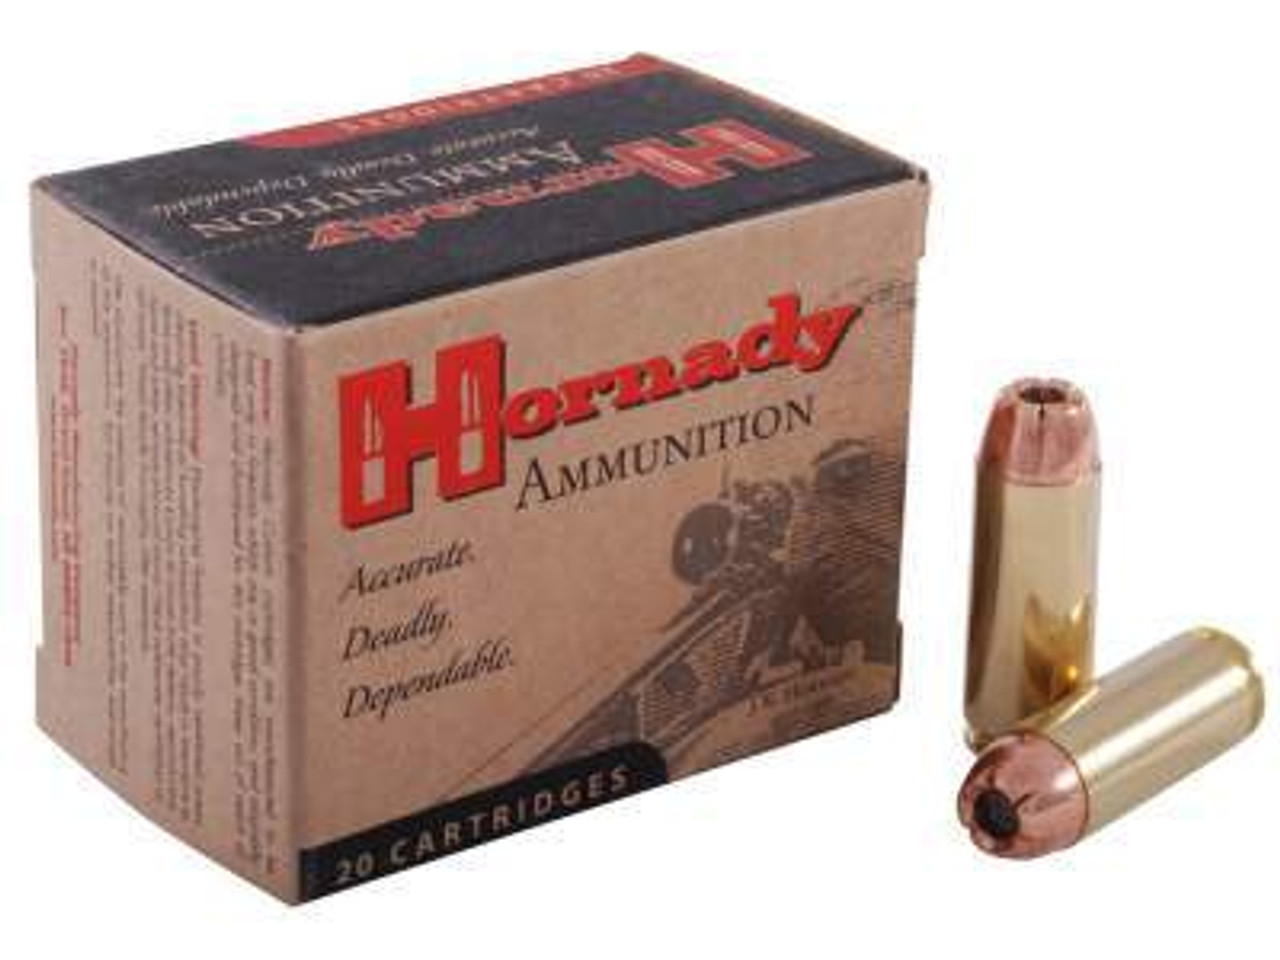 50 Action Express (AE), 300 grain JHP (XTP), New Brass, 50 Rounds